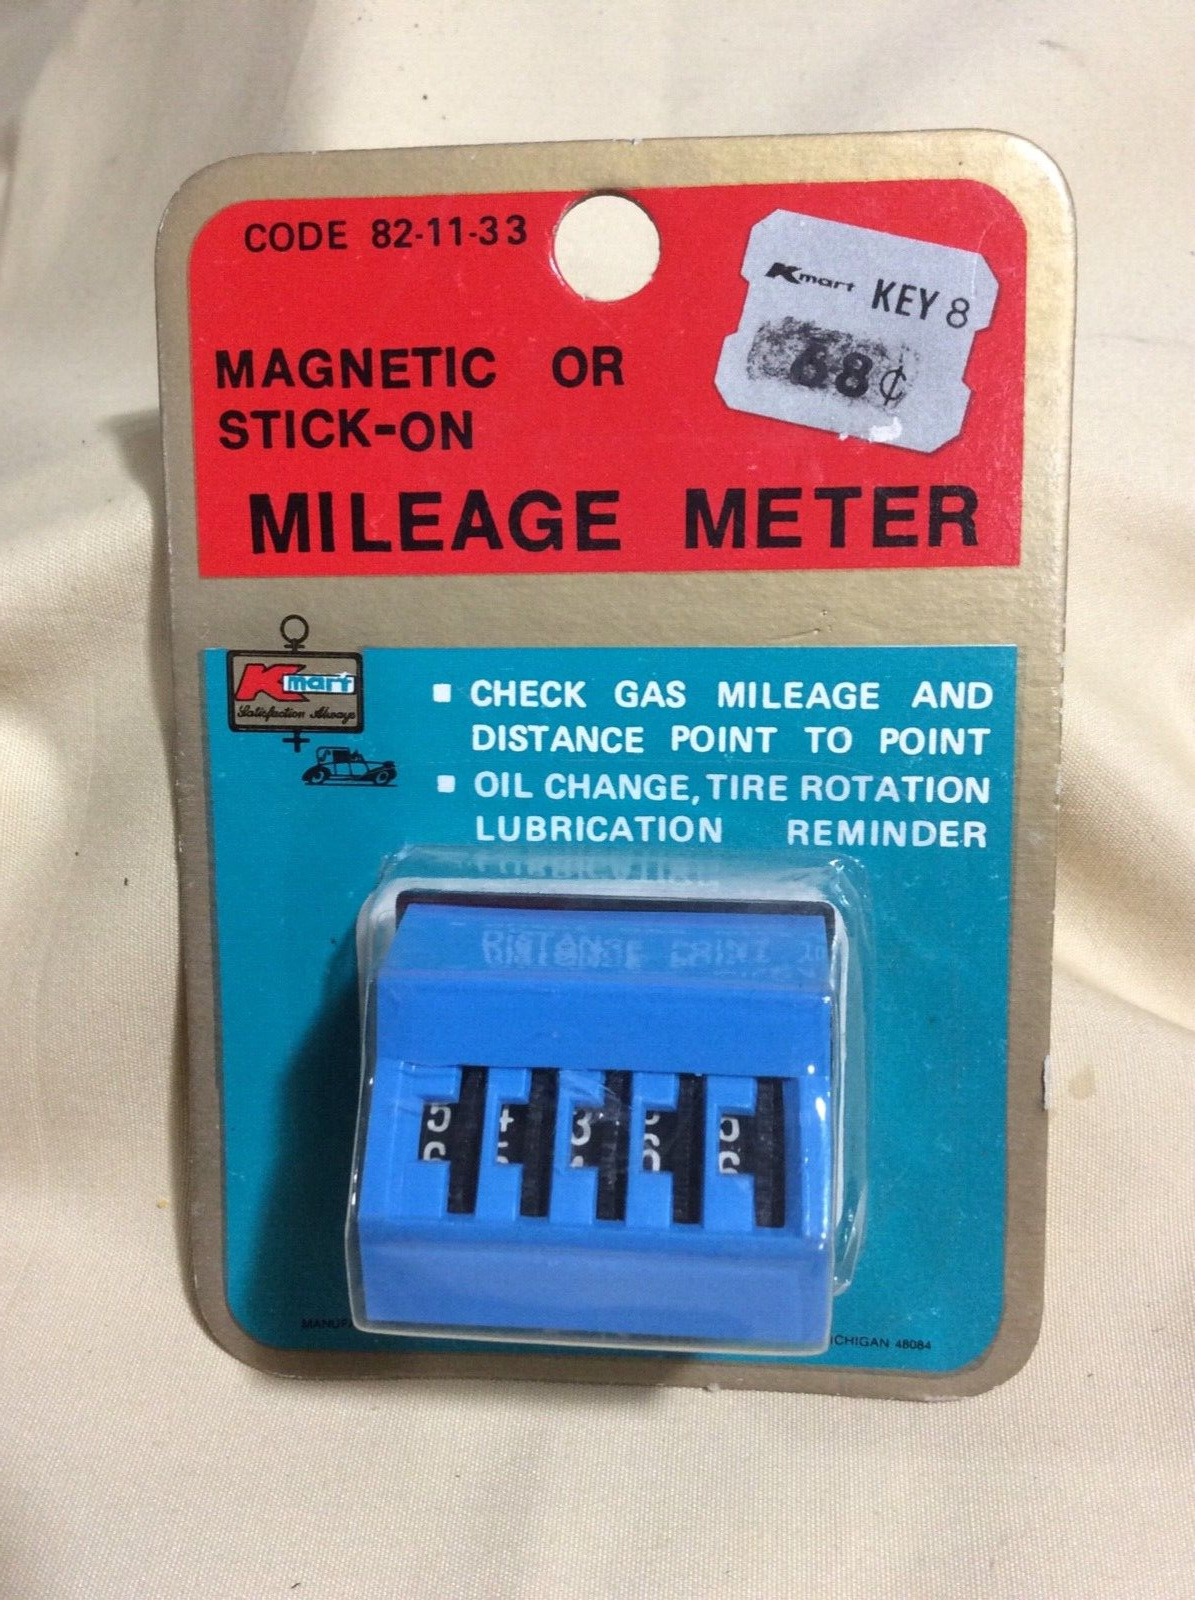 Vintage New In Package Kmart Automobile Mileage Meter Gas Mileage/Oil Chg Remind